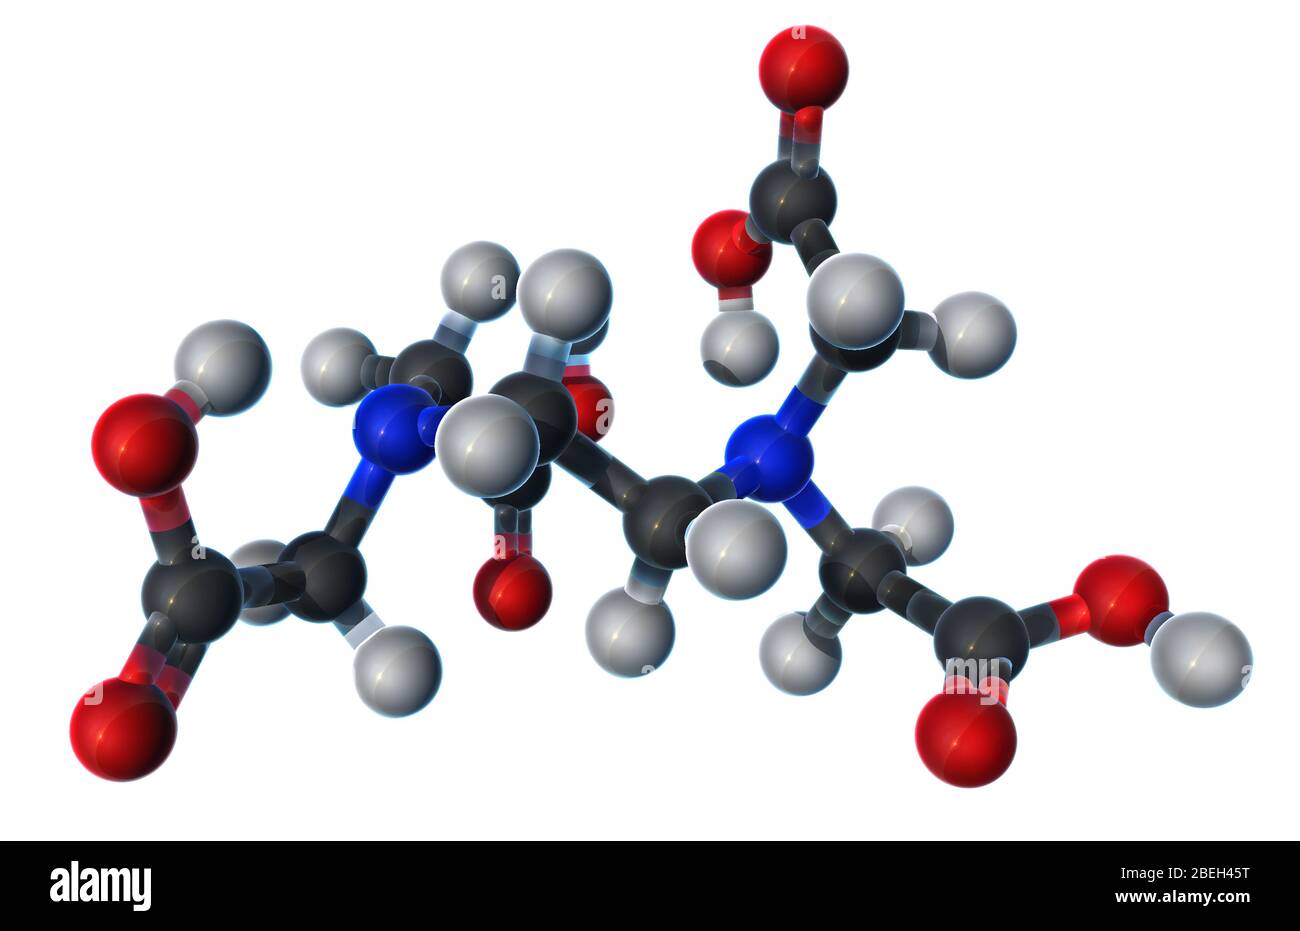 A molecular model of ethylenediaminetetraacetic acid (EDTA), a colorless, water-soluble solid used in chelation therapy to treat mercury and lead poisoning. EDTA has also been utilized as an antioxidant and food preservative, and can also be found in personal care and cleaner products. Atoms are colored dark gray (carbon), light gray (hydrogen), red (oxygen), and blue (nitrogen). Stock Photo